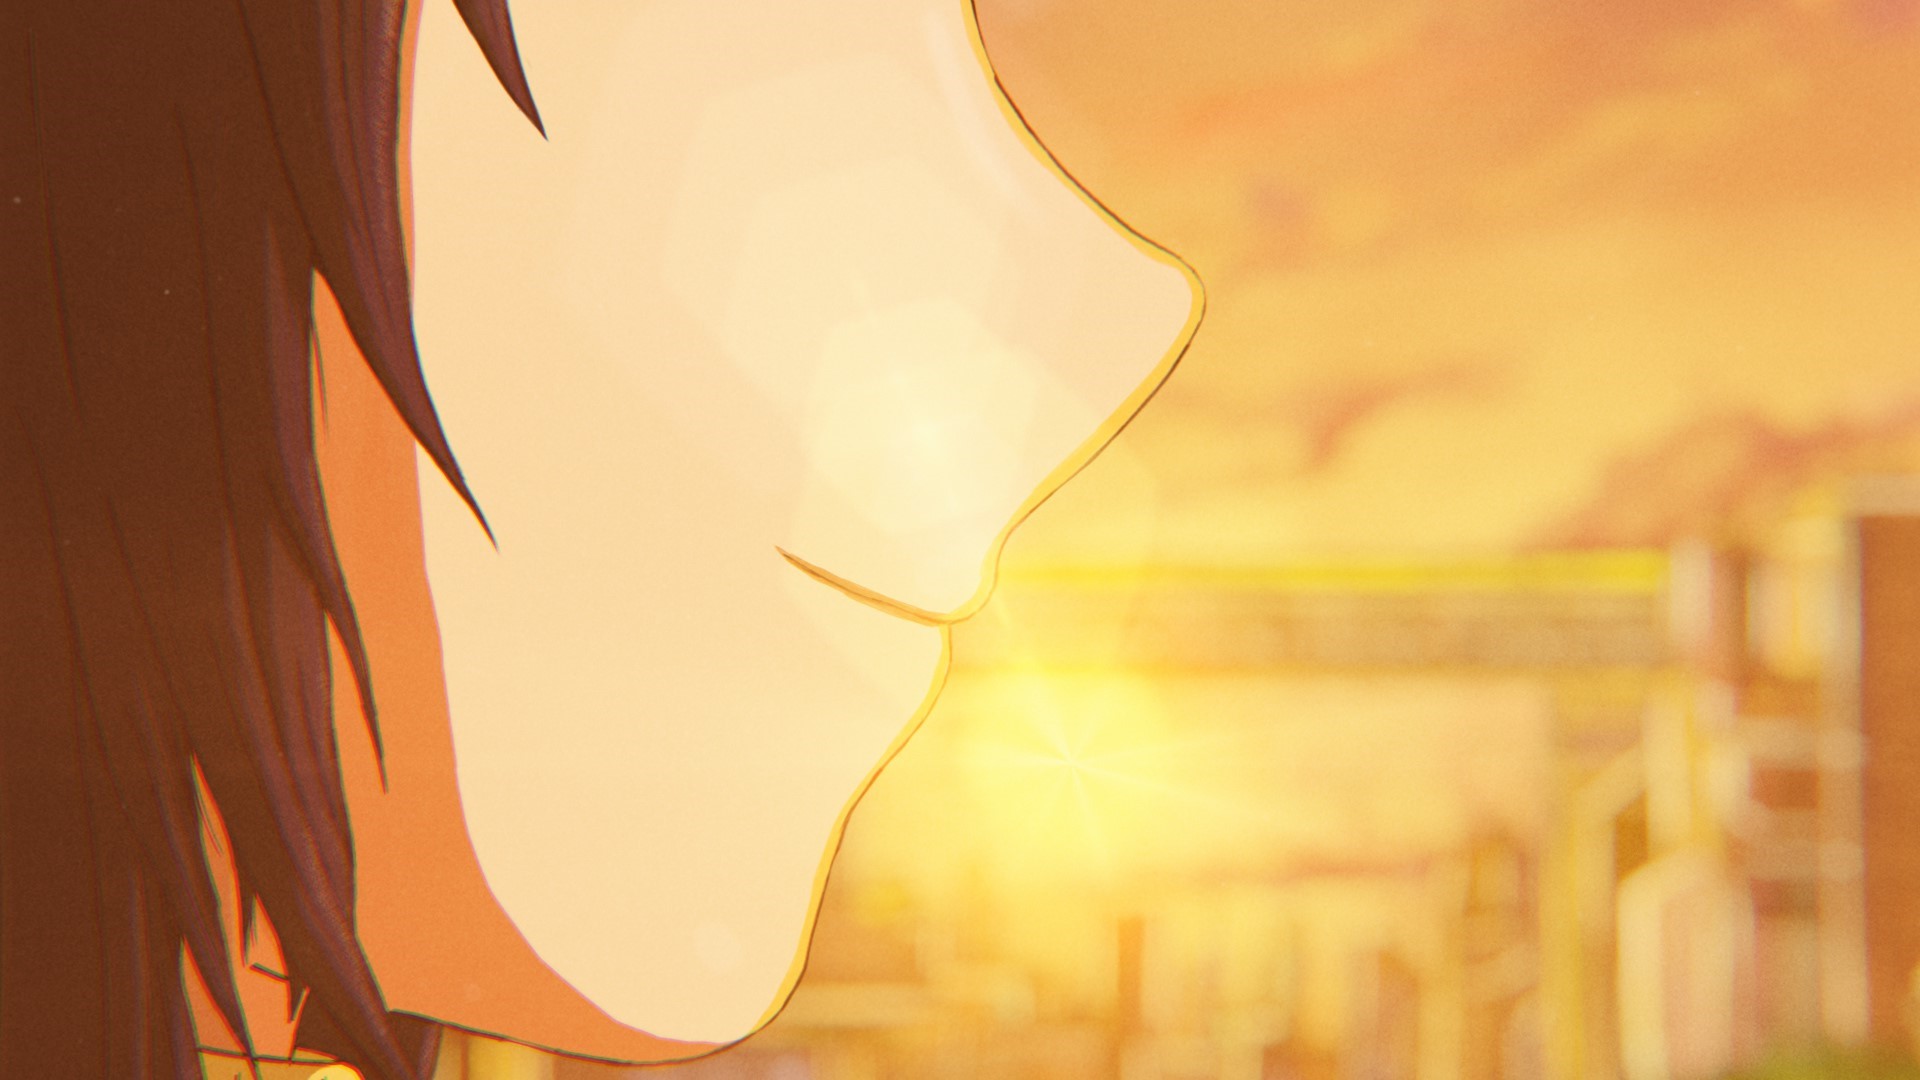 Anime 1920x1080 digital art glowing sunset anime anime girls smiling yellow sunset glow street outdoors closed mouth long hair blurred blurry background depth of field closeup